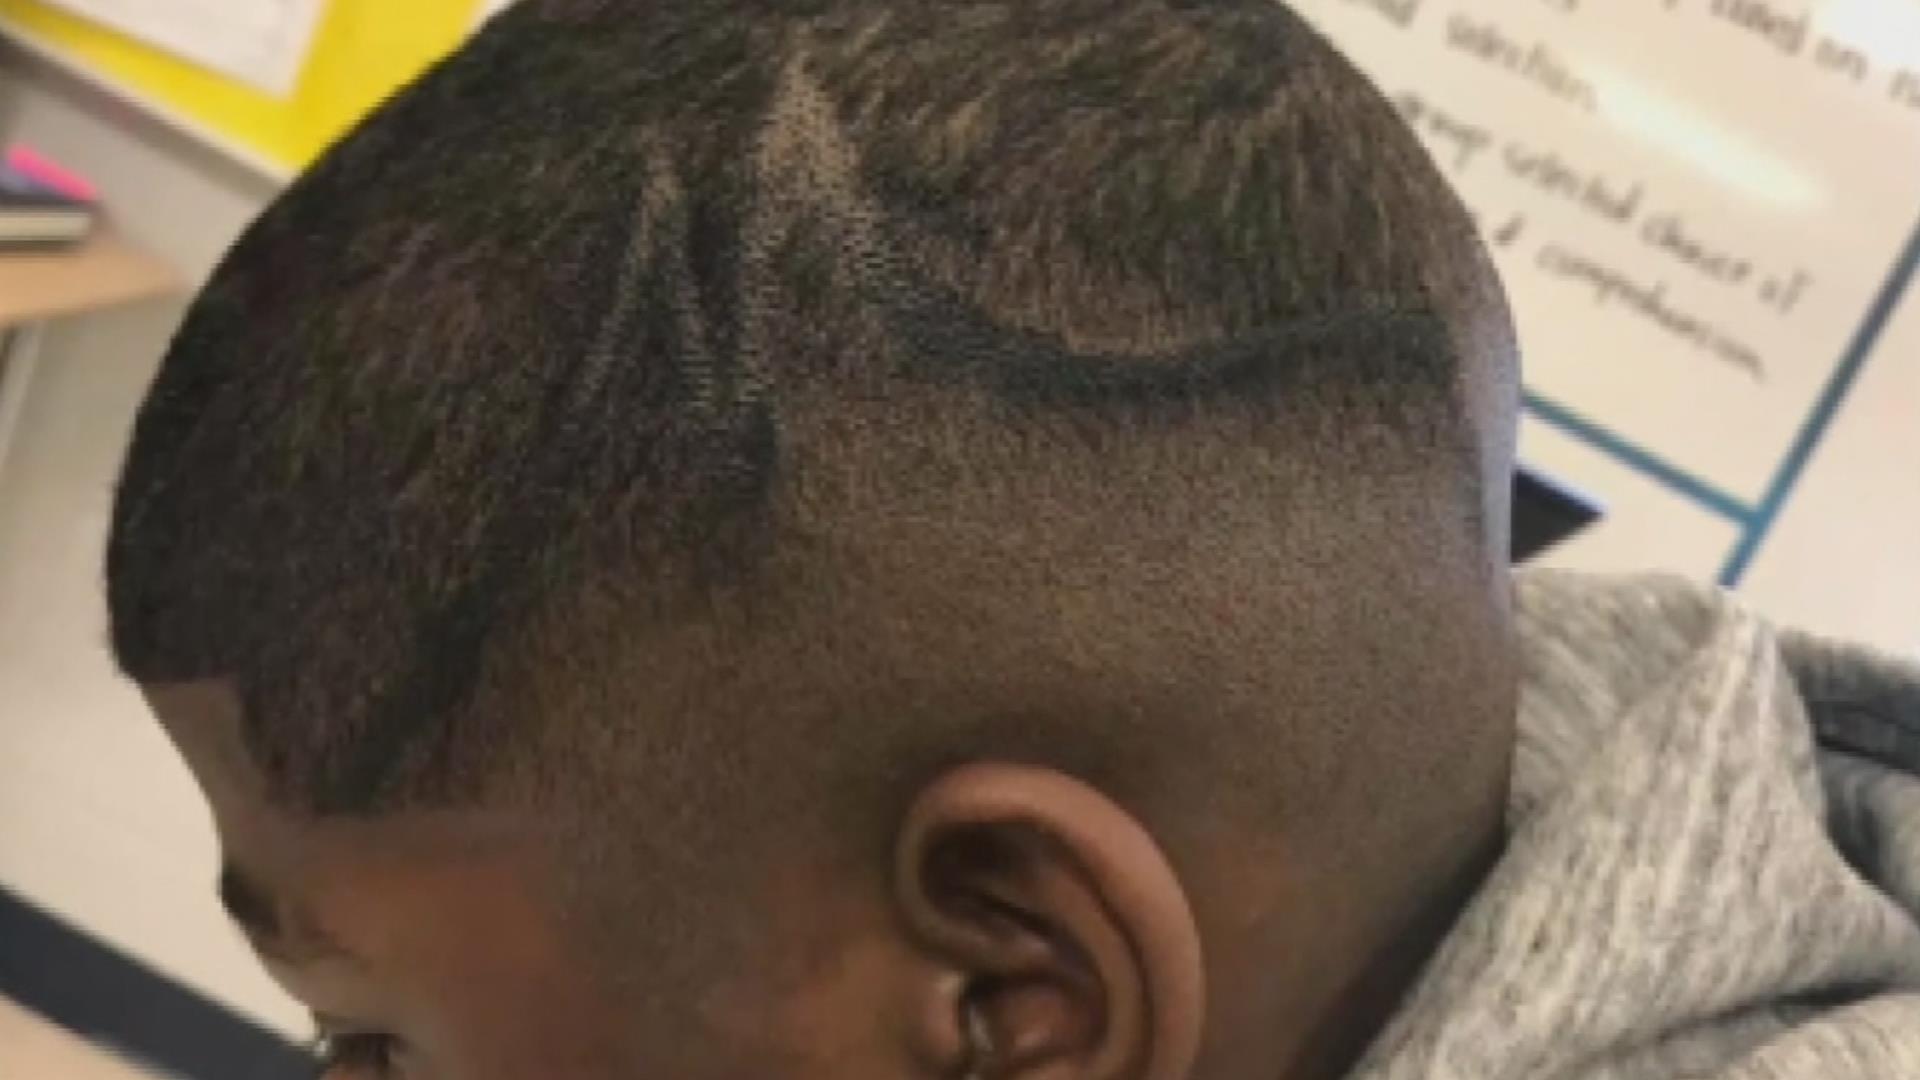 Texas school staffers colored in black teen's haircut with a Sharpie,  lawsuit claims